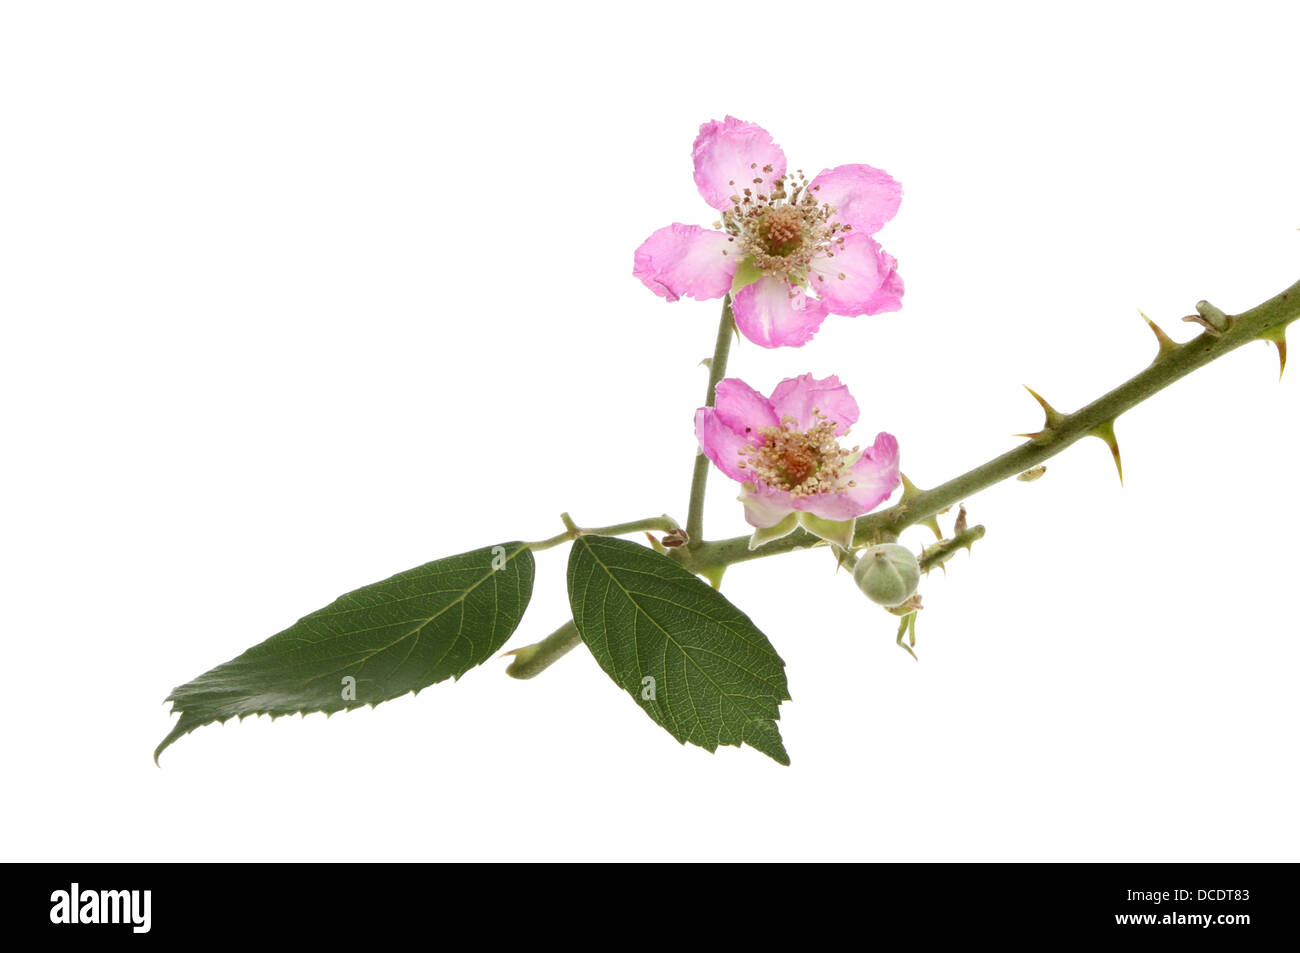 Blackberry, Rubus fruticosus, flowers leaves and thorns isolated against white Stock Photo